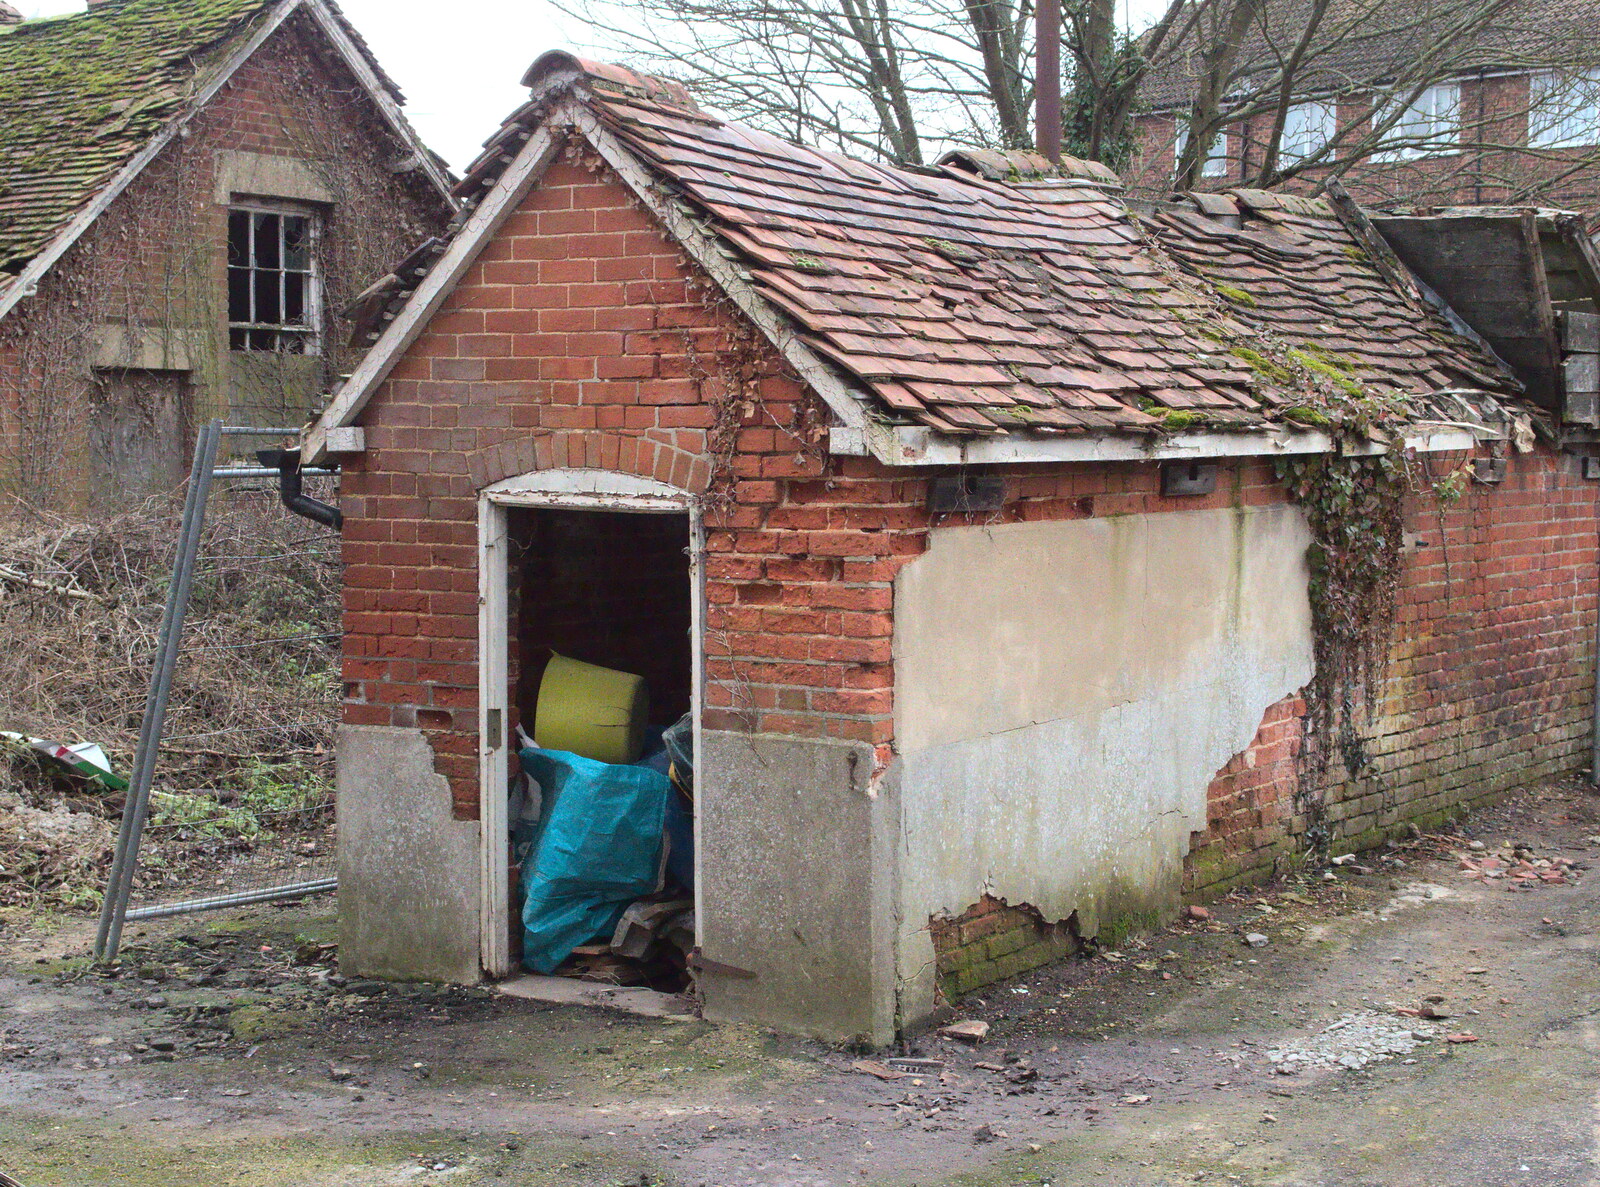 The outbuildings again from Closing Down: A Late January Miscellany, Diss, Norfolk - 31st January 2015